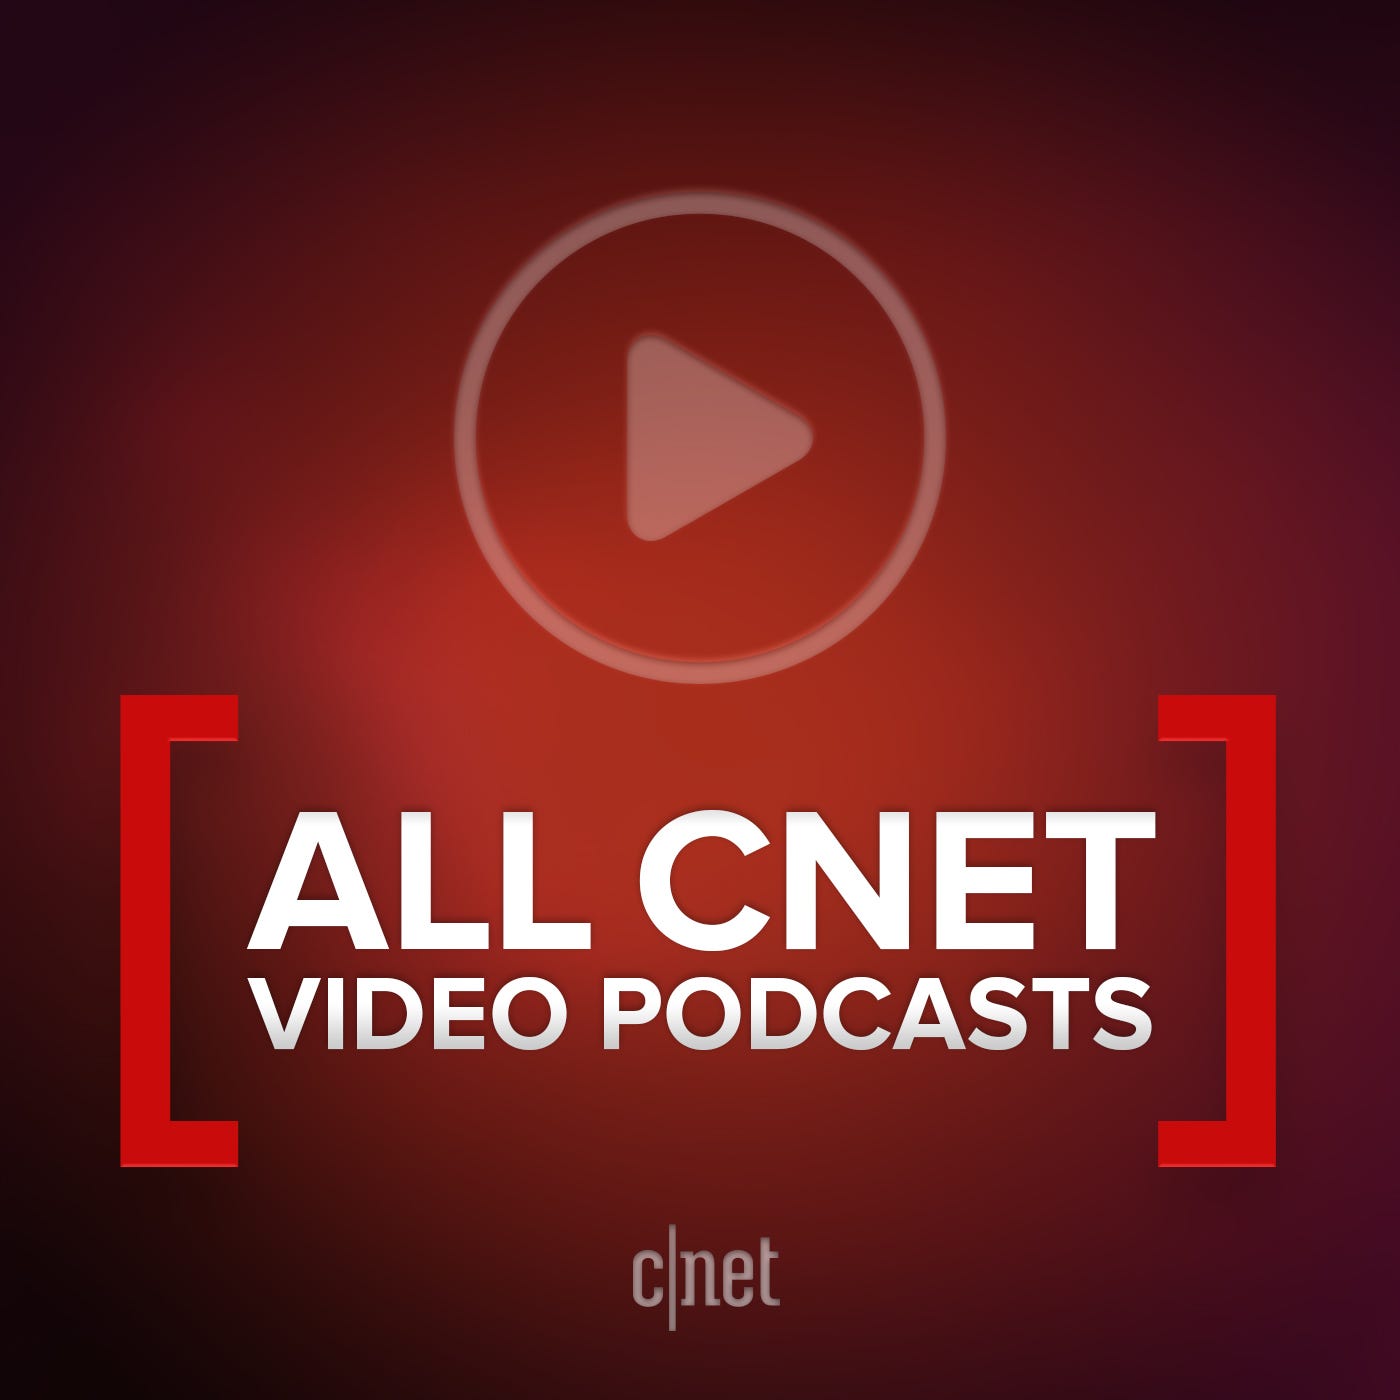 All CNET Video Podcasts (SD) artwork